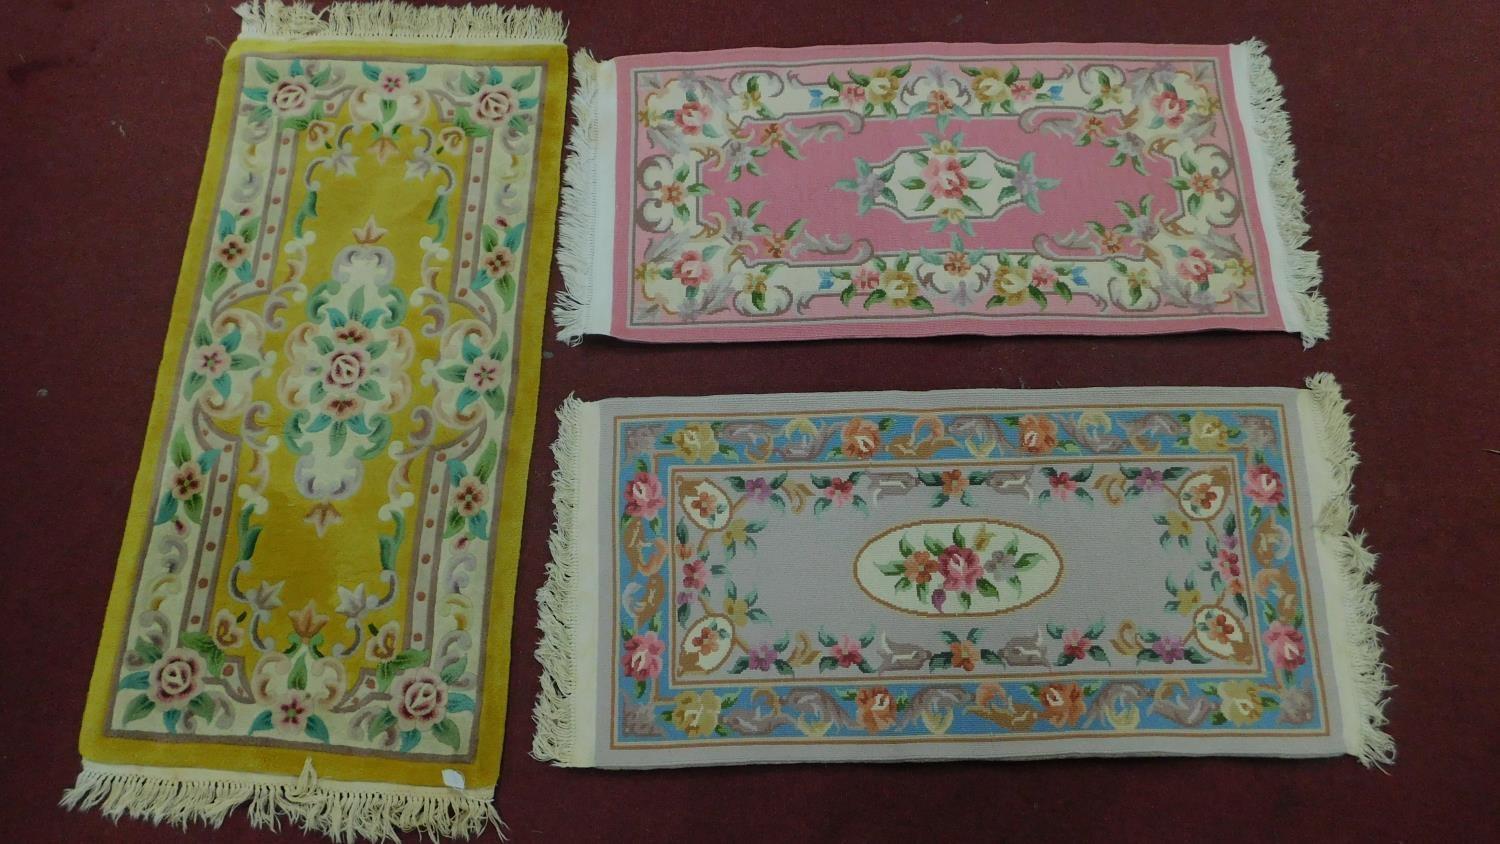 3 Chinese style rugs all set on a pastel field with central floral medallion within floral boarders.